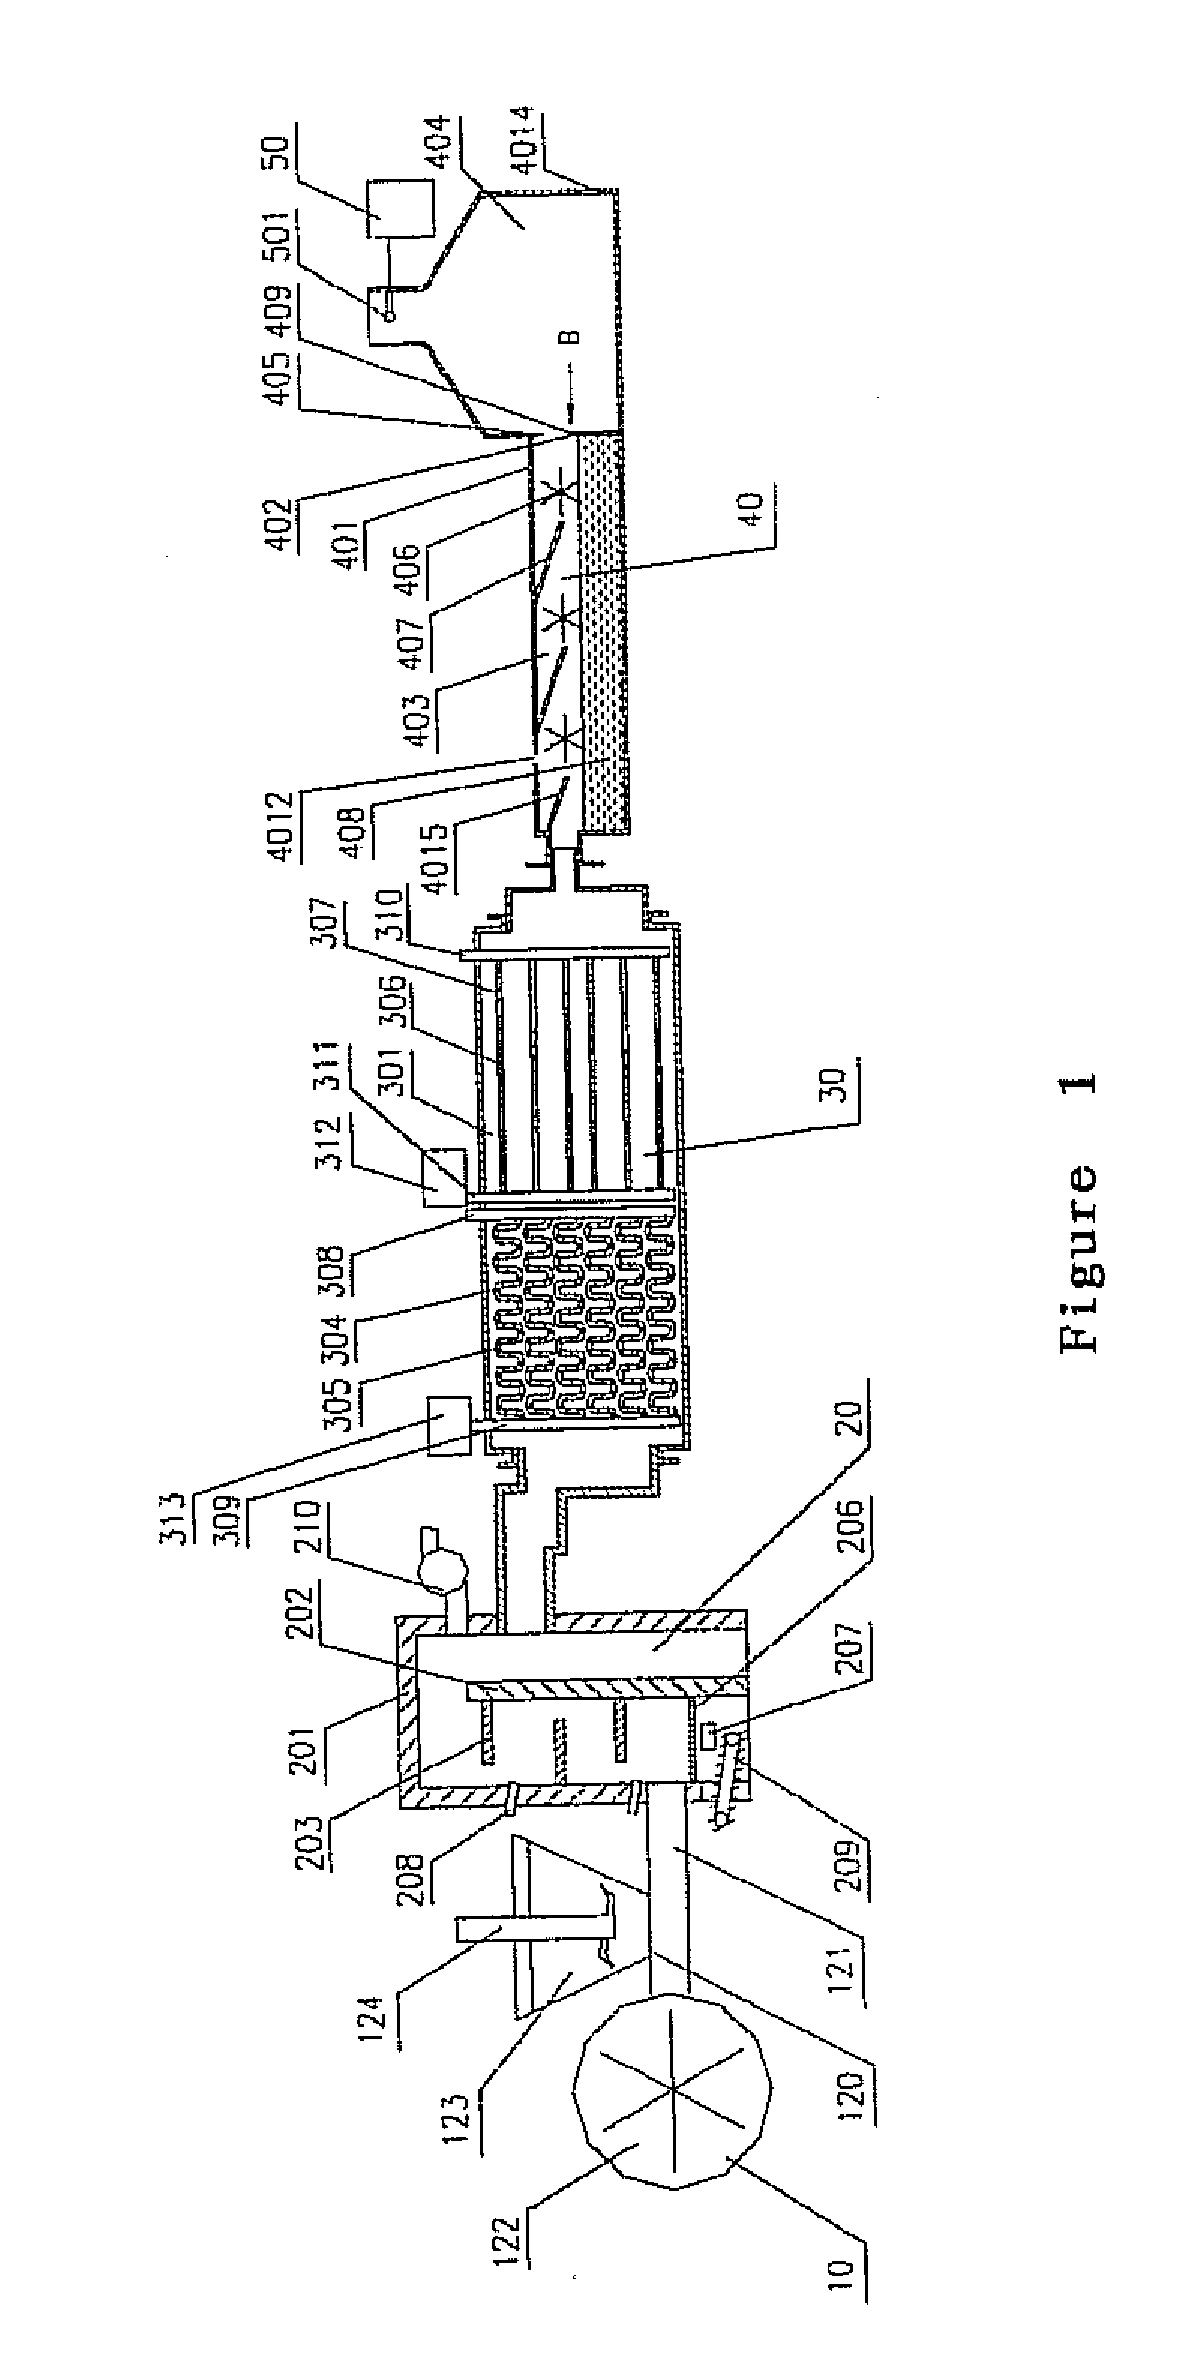 Apparatus for incinerating waste and process for comprehensive utilization of waste